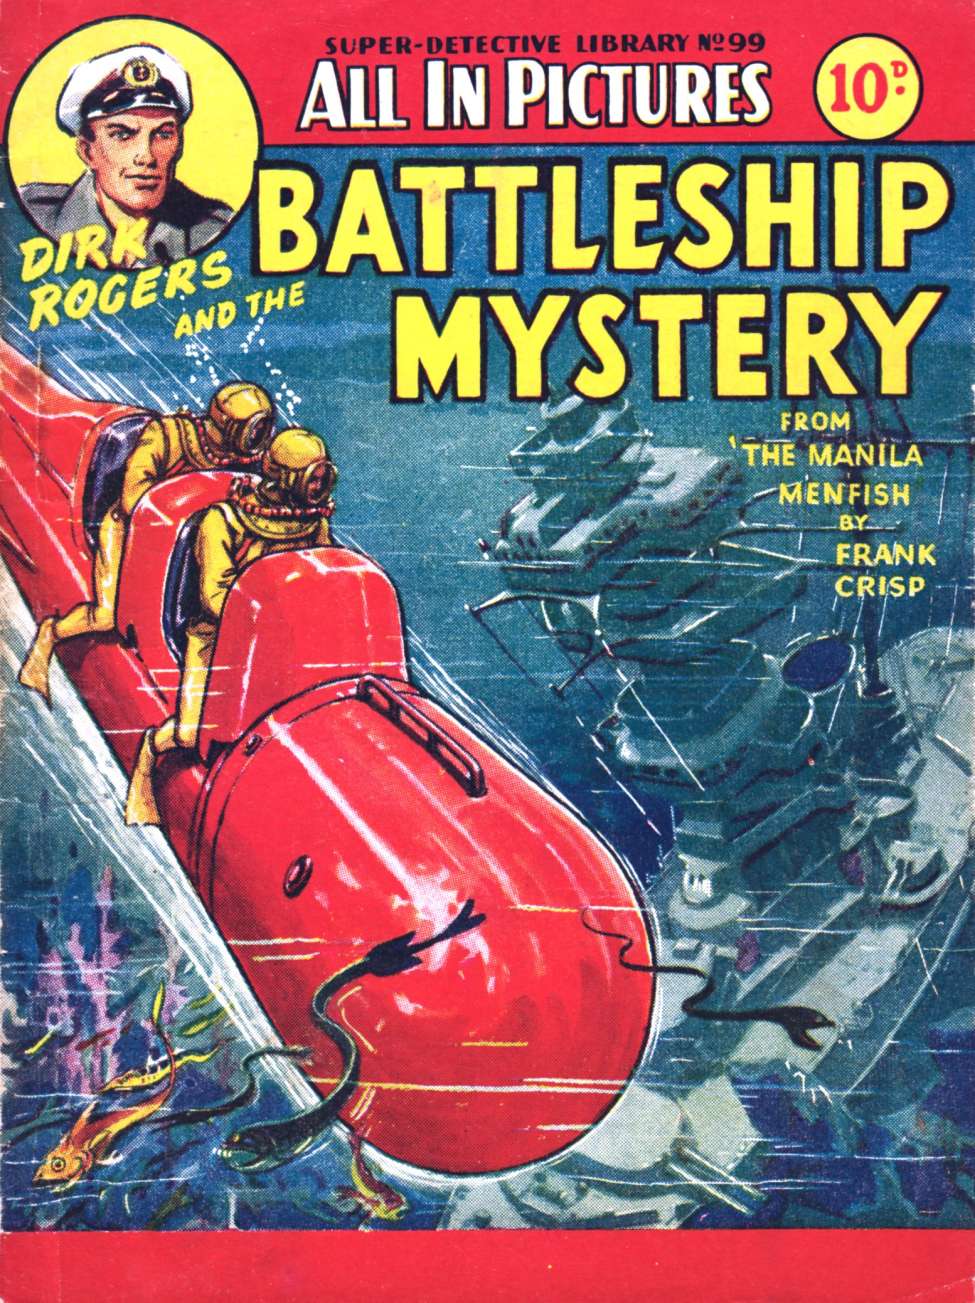 Book Cover For Super Detective Library 99 - Dirk Rogers and The Battleship Mystery